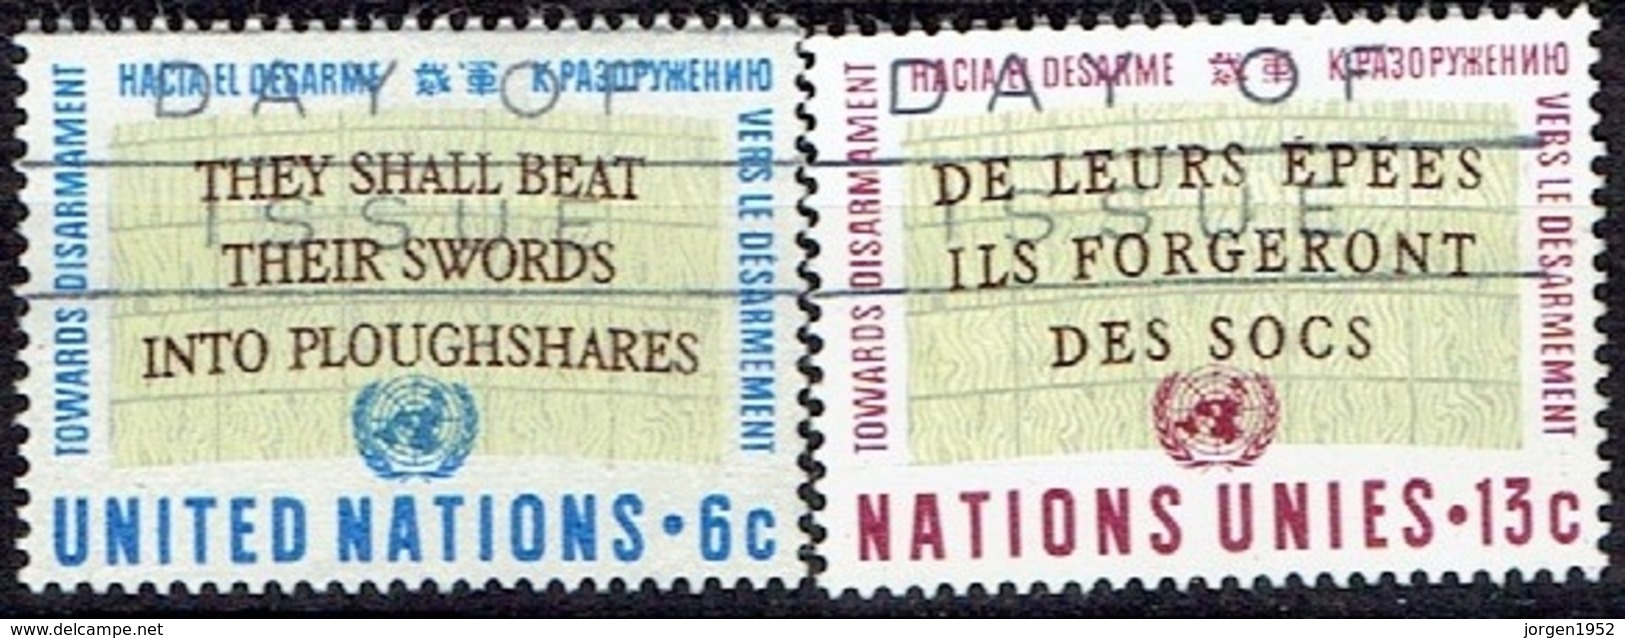 UNITED NATIONS # NEW YORK FROM 1967 STAMPWORLD 187-88 - Usados